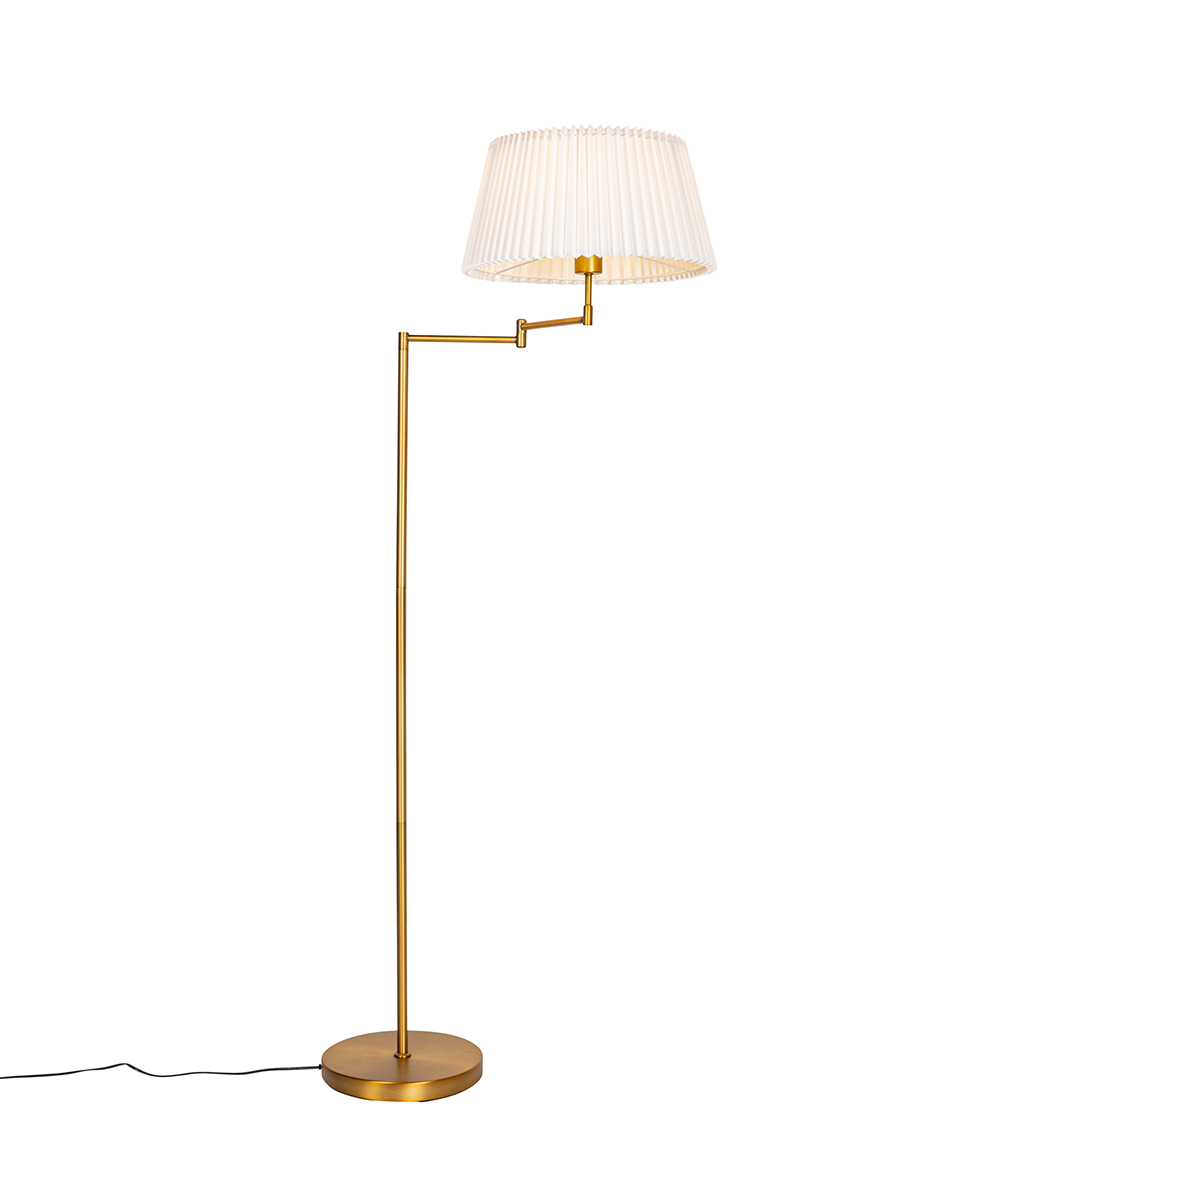 Bronze floor lamp with white pleated shade and adjustable arm - Ladas Deluxe